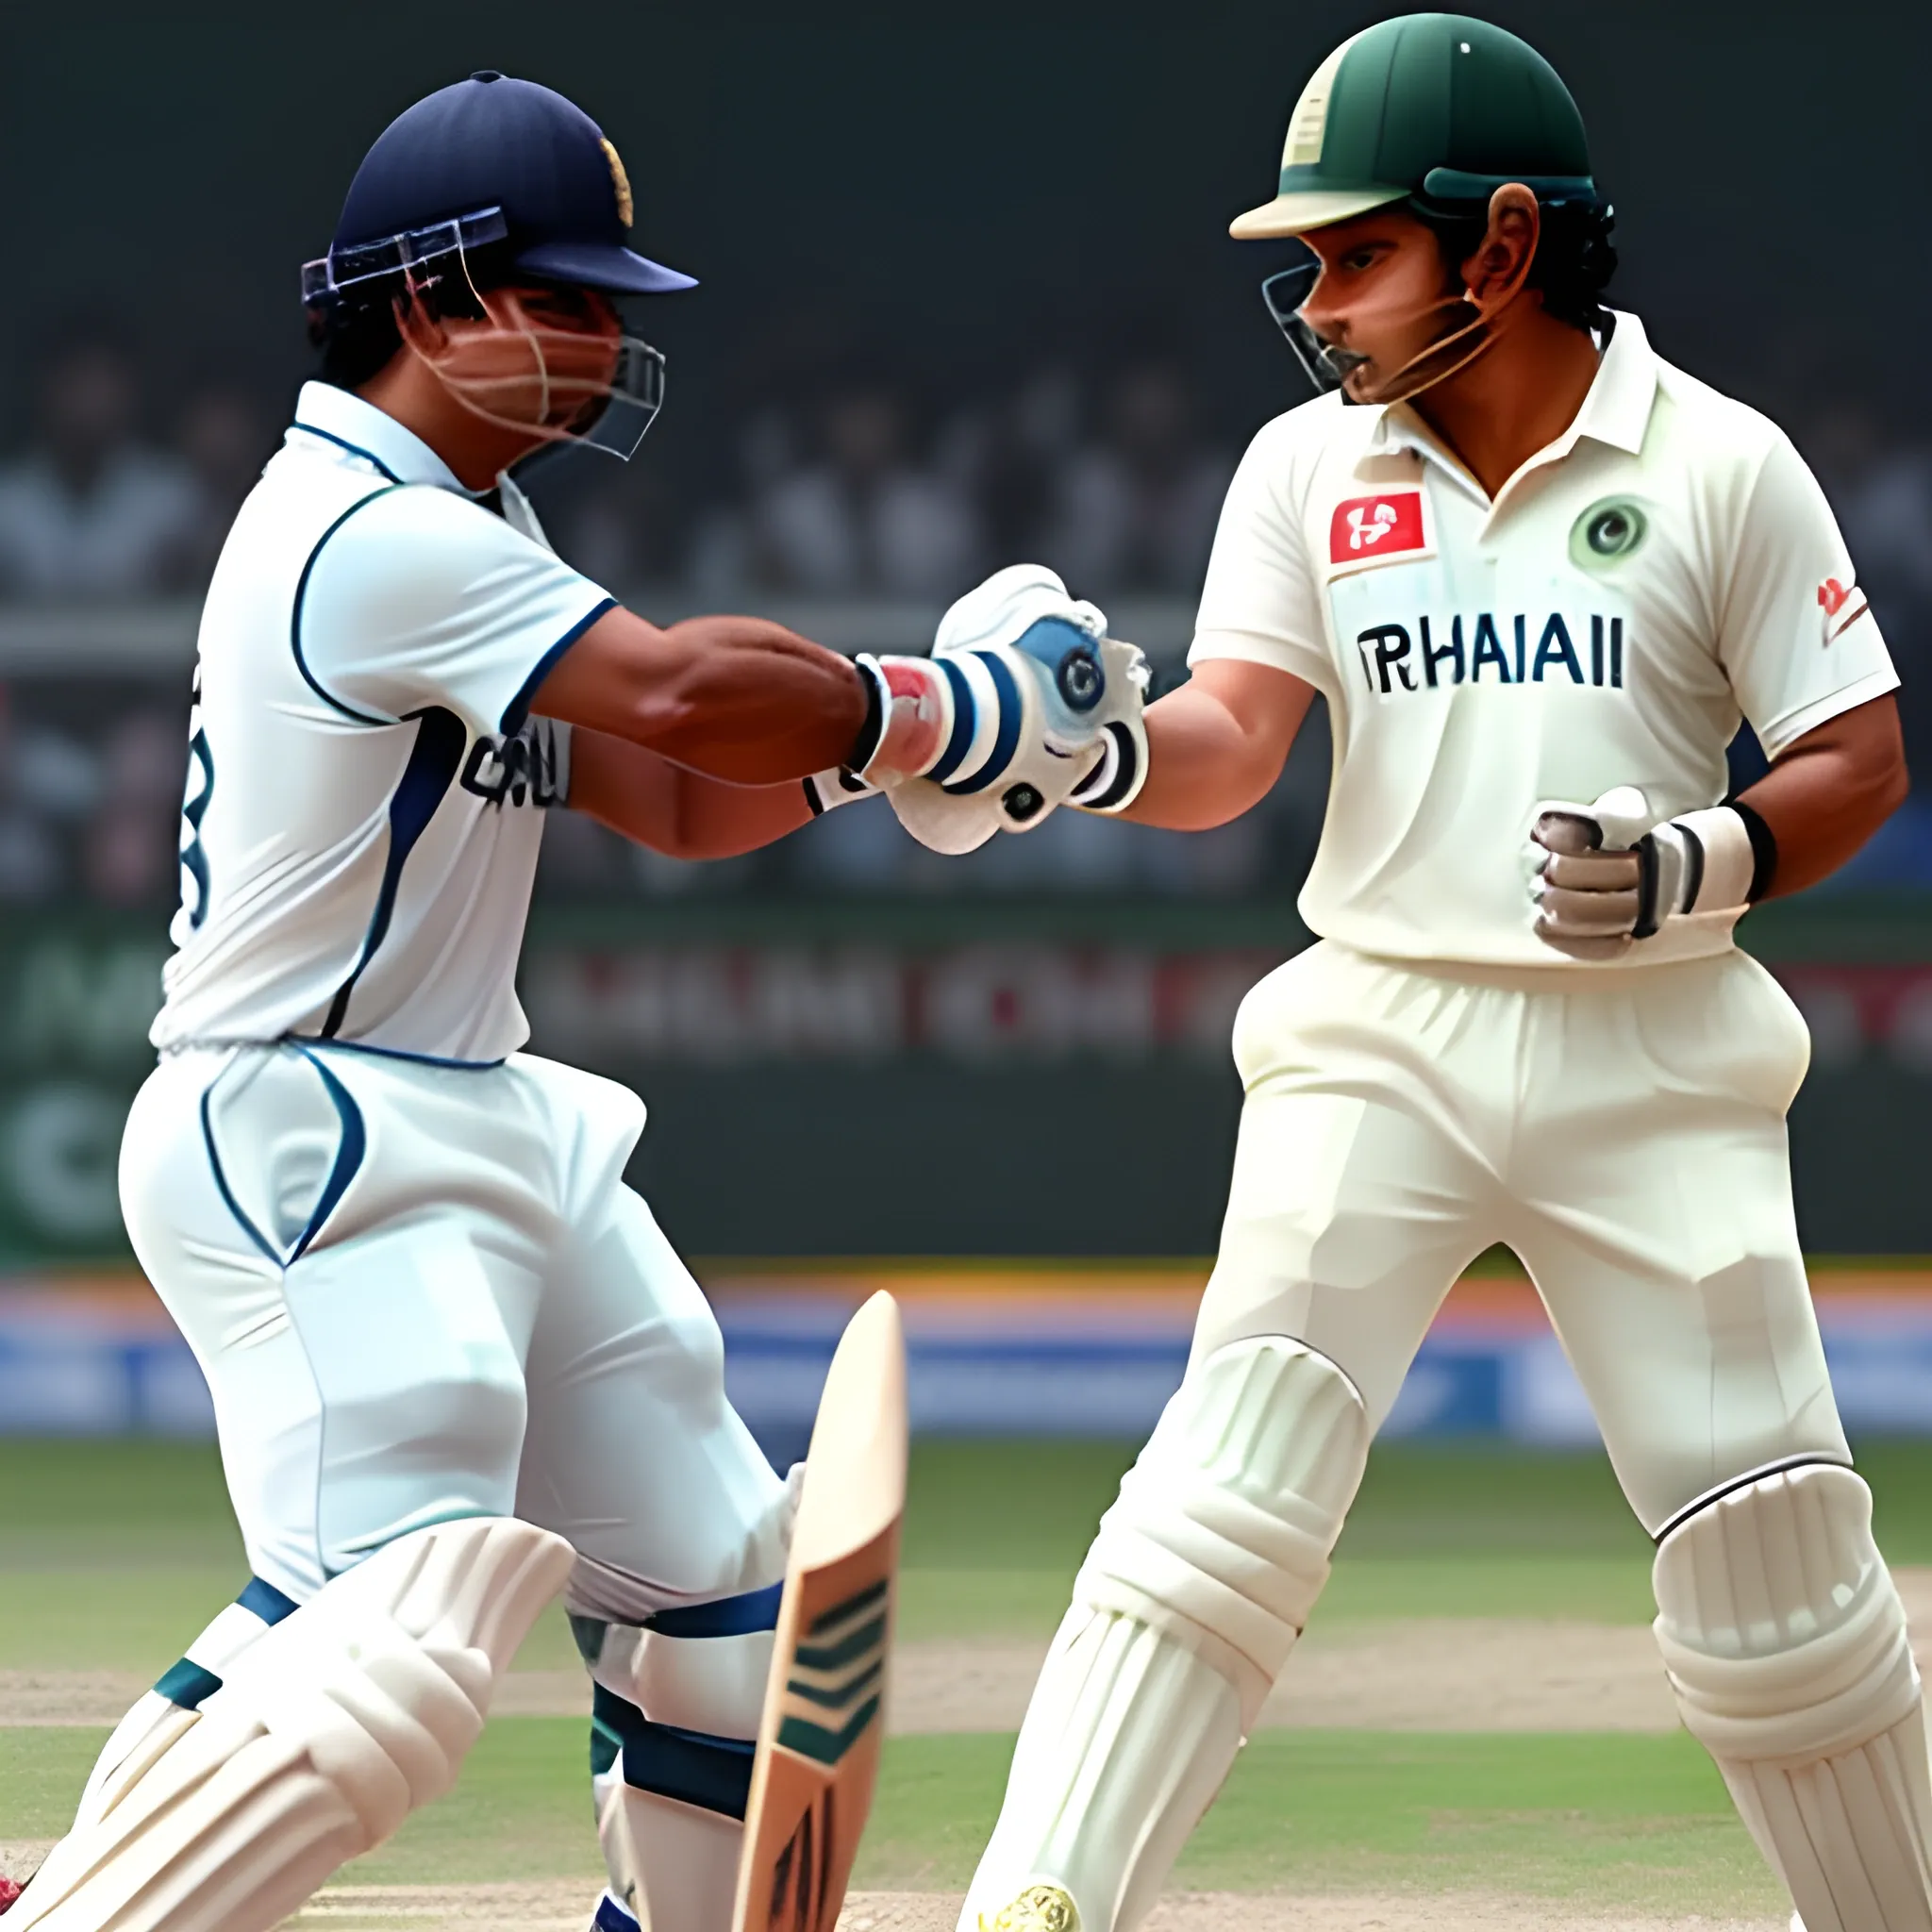 a photo of ((Sachin Tendulkar)) and ((Rahul Dravid)) fighting with each other with bat in hand, ultra HD, hyper realistic, great face details, saurav Ganguly crying in background.